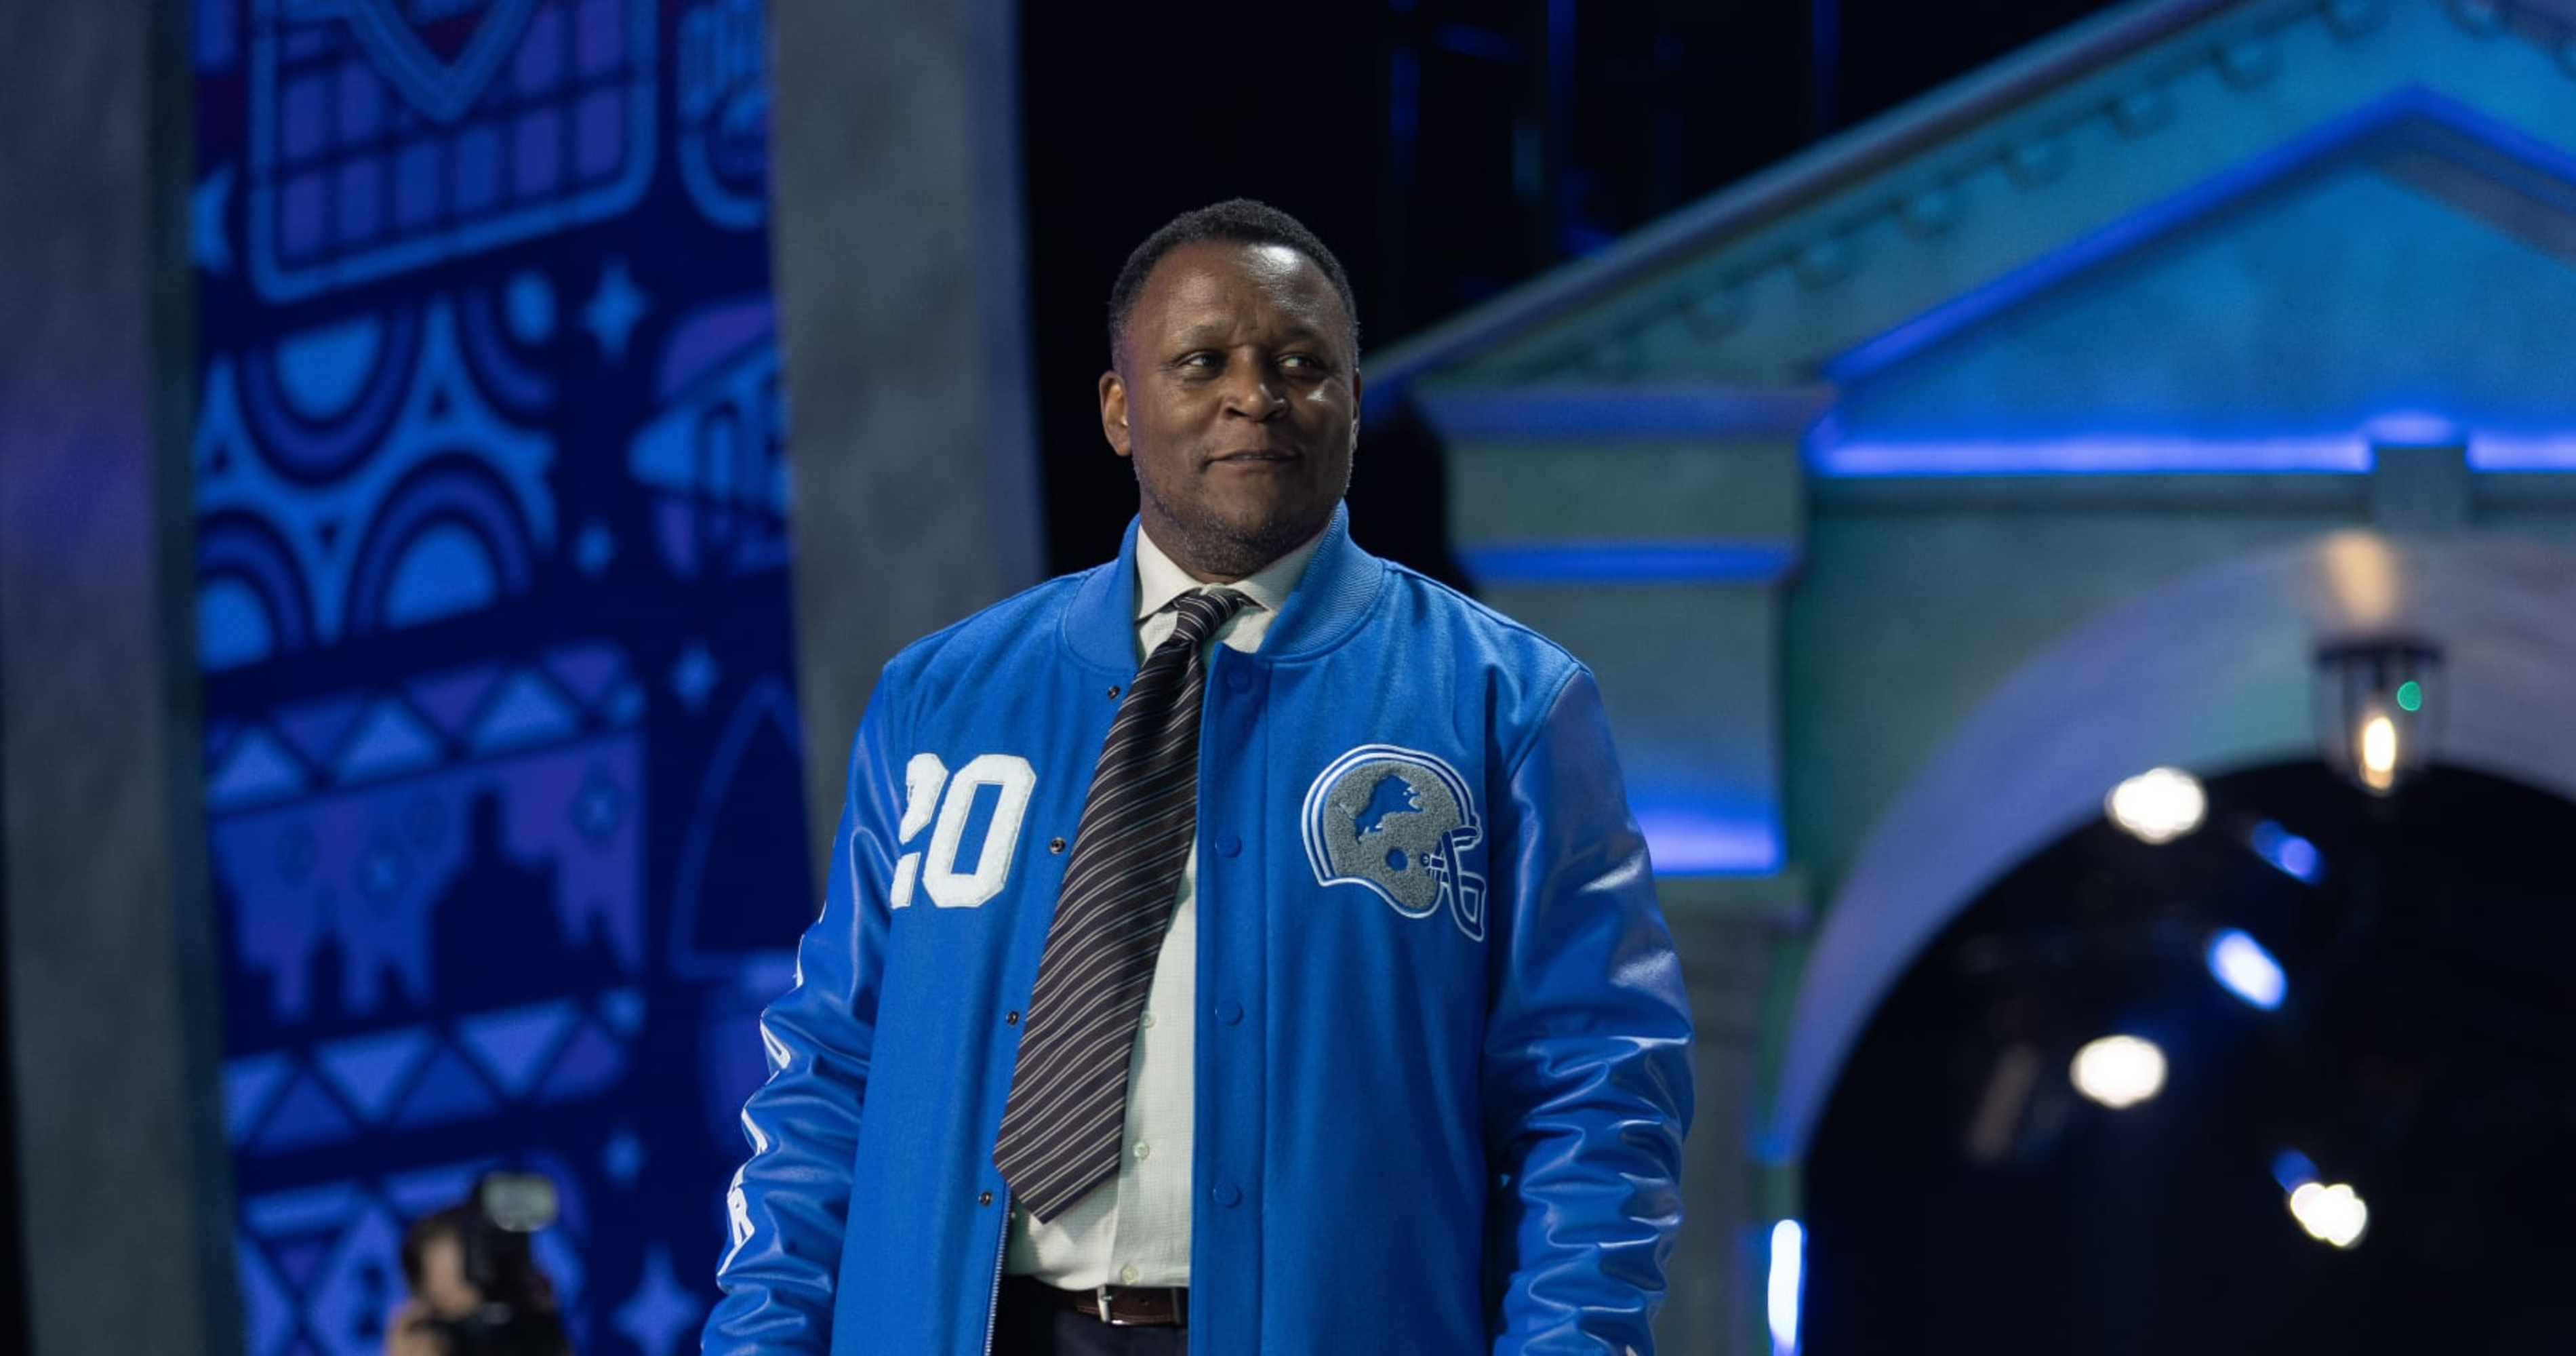 Barry Sanders Reveals Heart Health Scare: NFL Legend Shares Experience | Latest News, Scores, Highlights, Stats, and Rumors